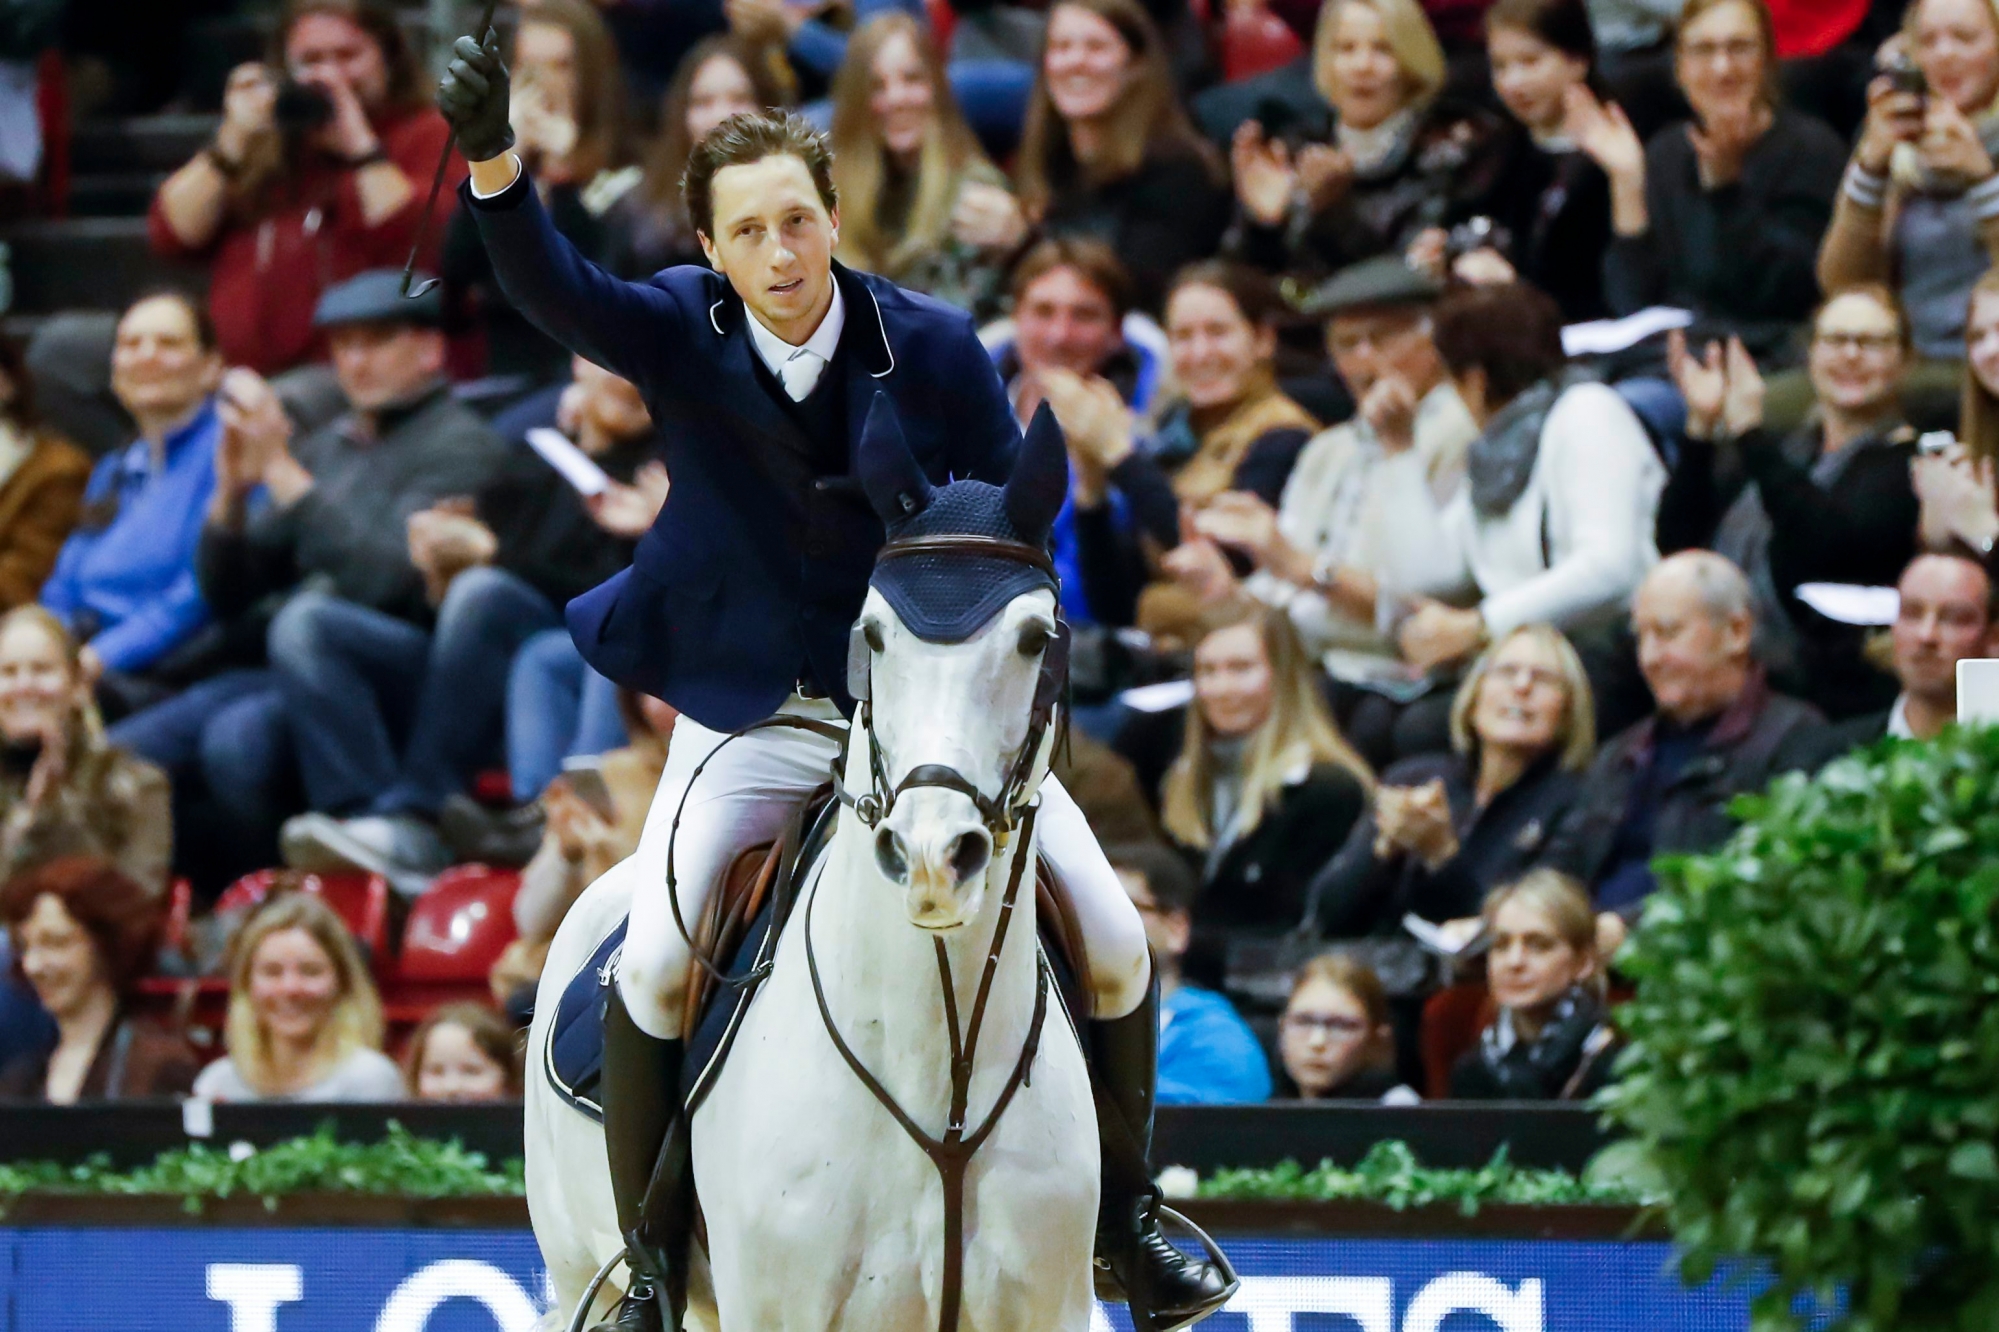 Martin Fuchs from Switzerland rides his horse Clooney and wins the International Longines Grand Prix at CSI Basel in the St. Jakobshalle in Basel, Switzerland, on Sunday, January 14, 2018. (KEYSTONE/Christian Merz) SWITZERLAND HORSE JUMPING CSI BASEL